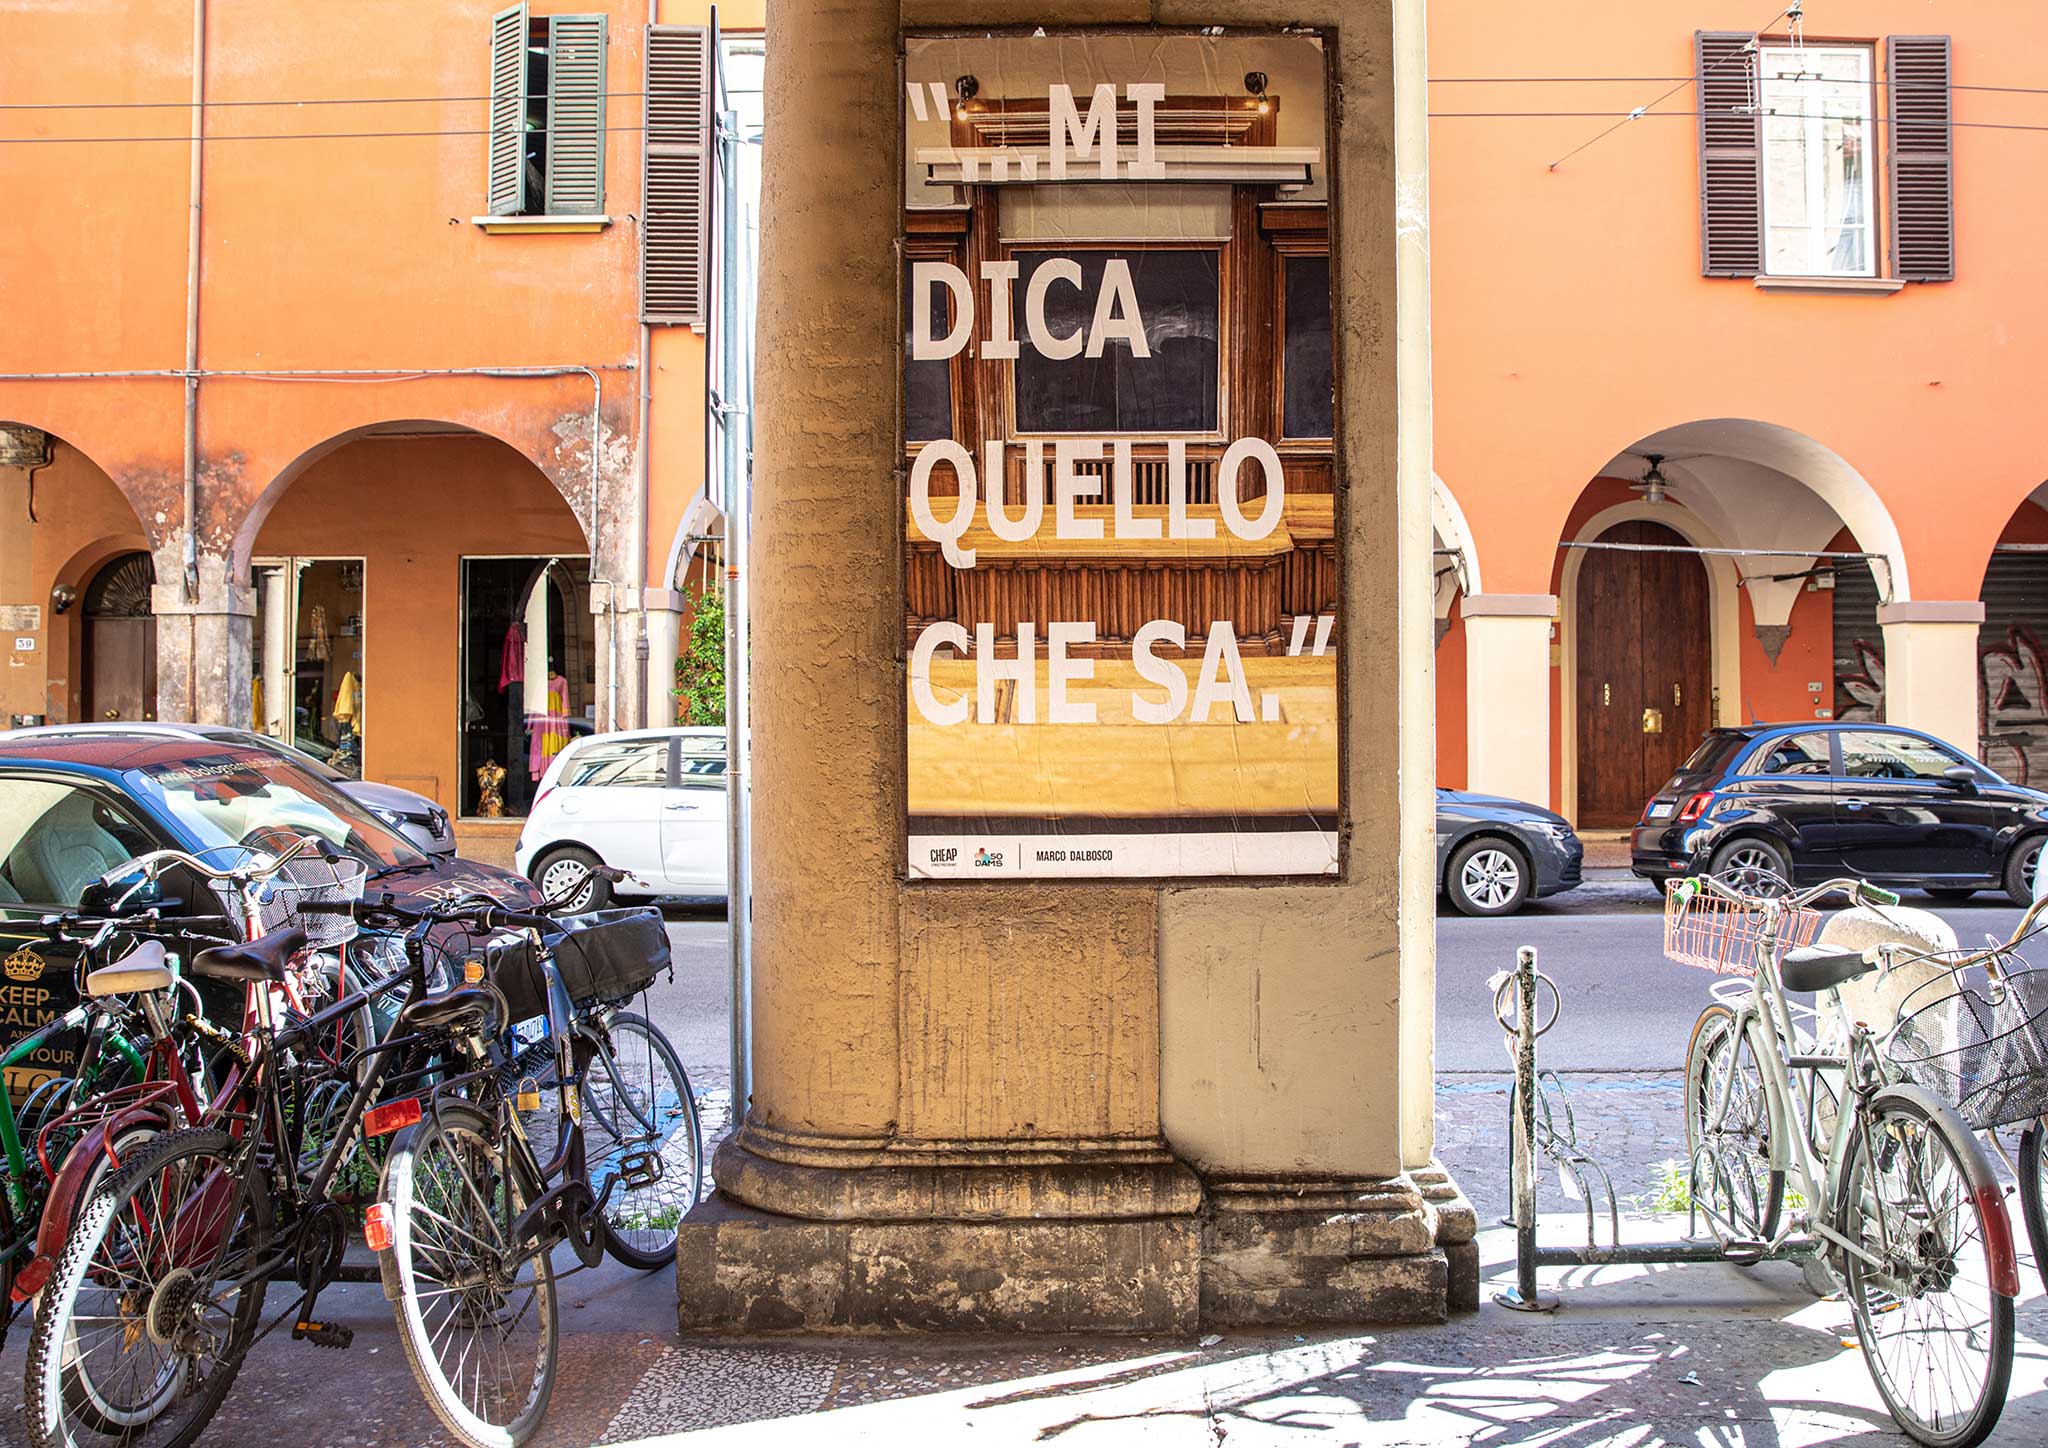 4.	“…MI DICA QUELLO CHE SA”, DAMS50, 50 years D.A.M.S. (University of Literature and Philosophy of Bologna). 10 Poster, 10 artists, Bologna Italy, 2021
Photo by Cheap Street Poster Art